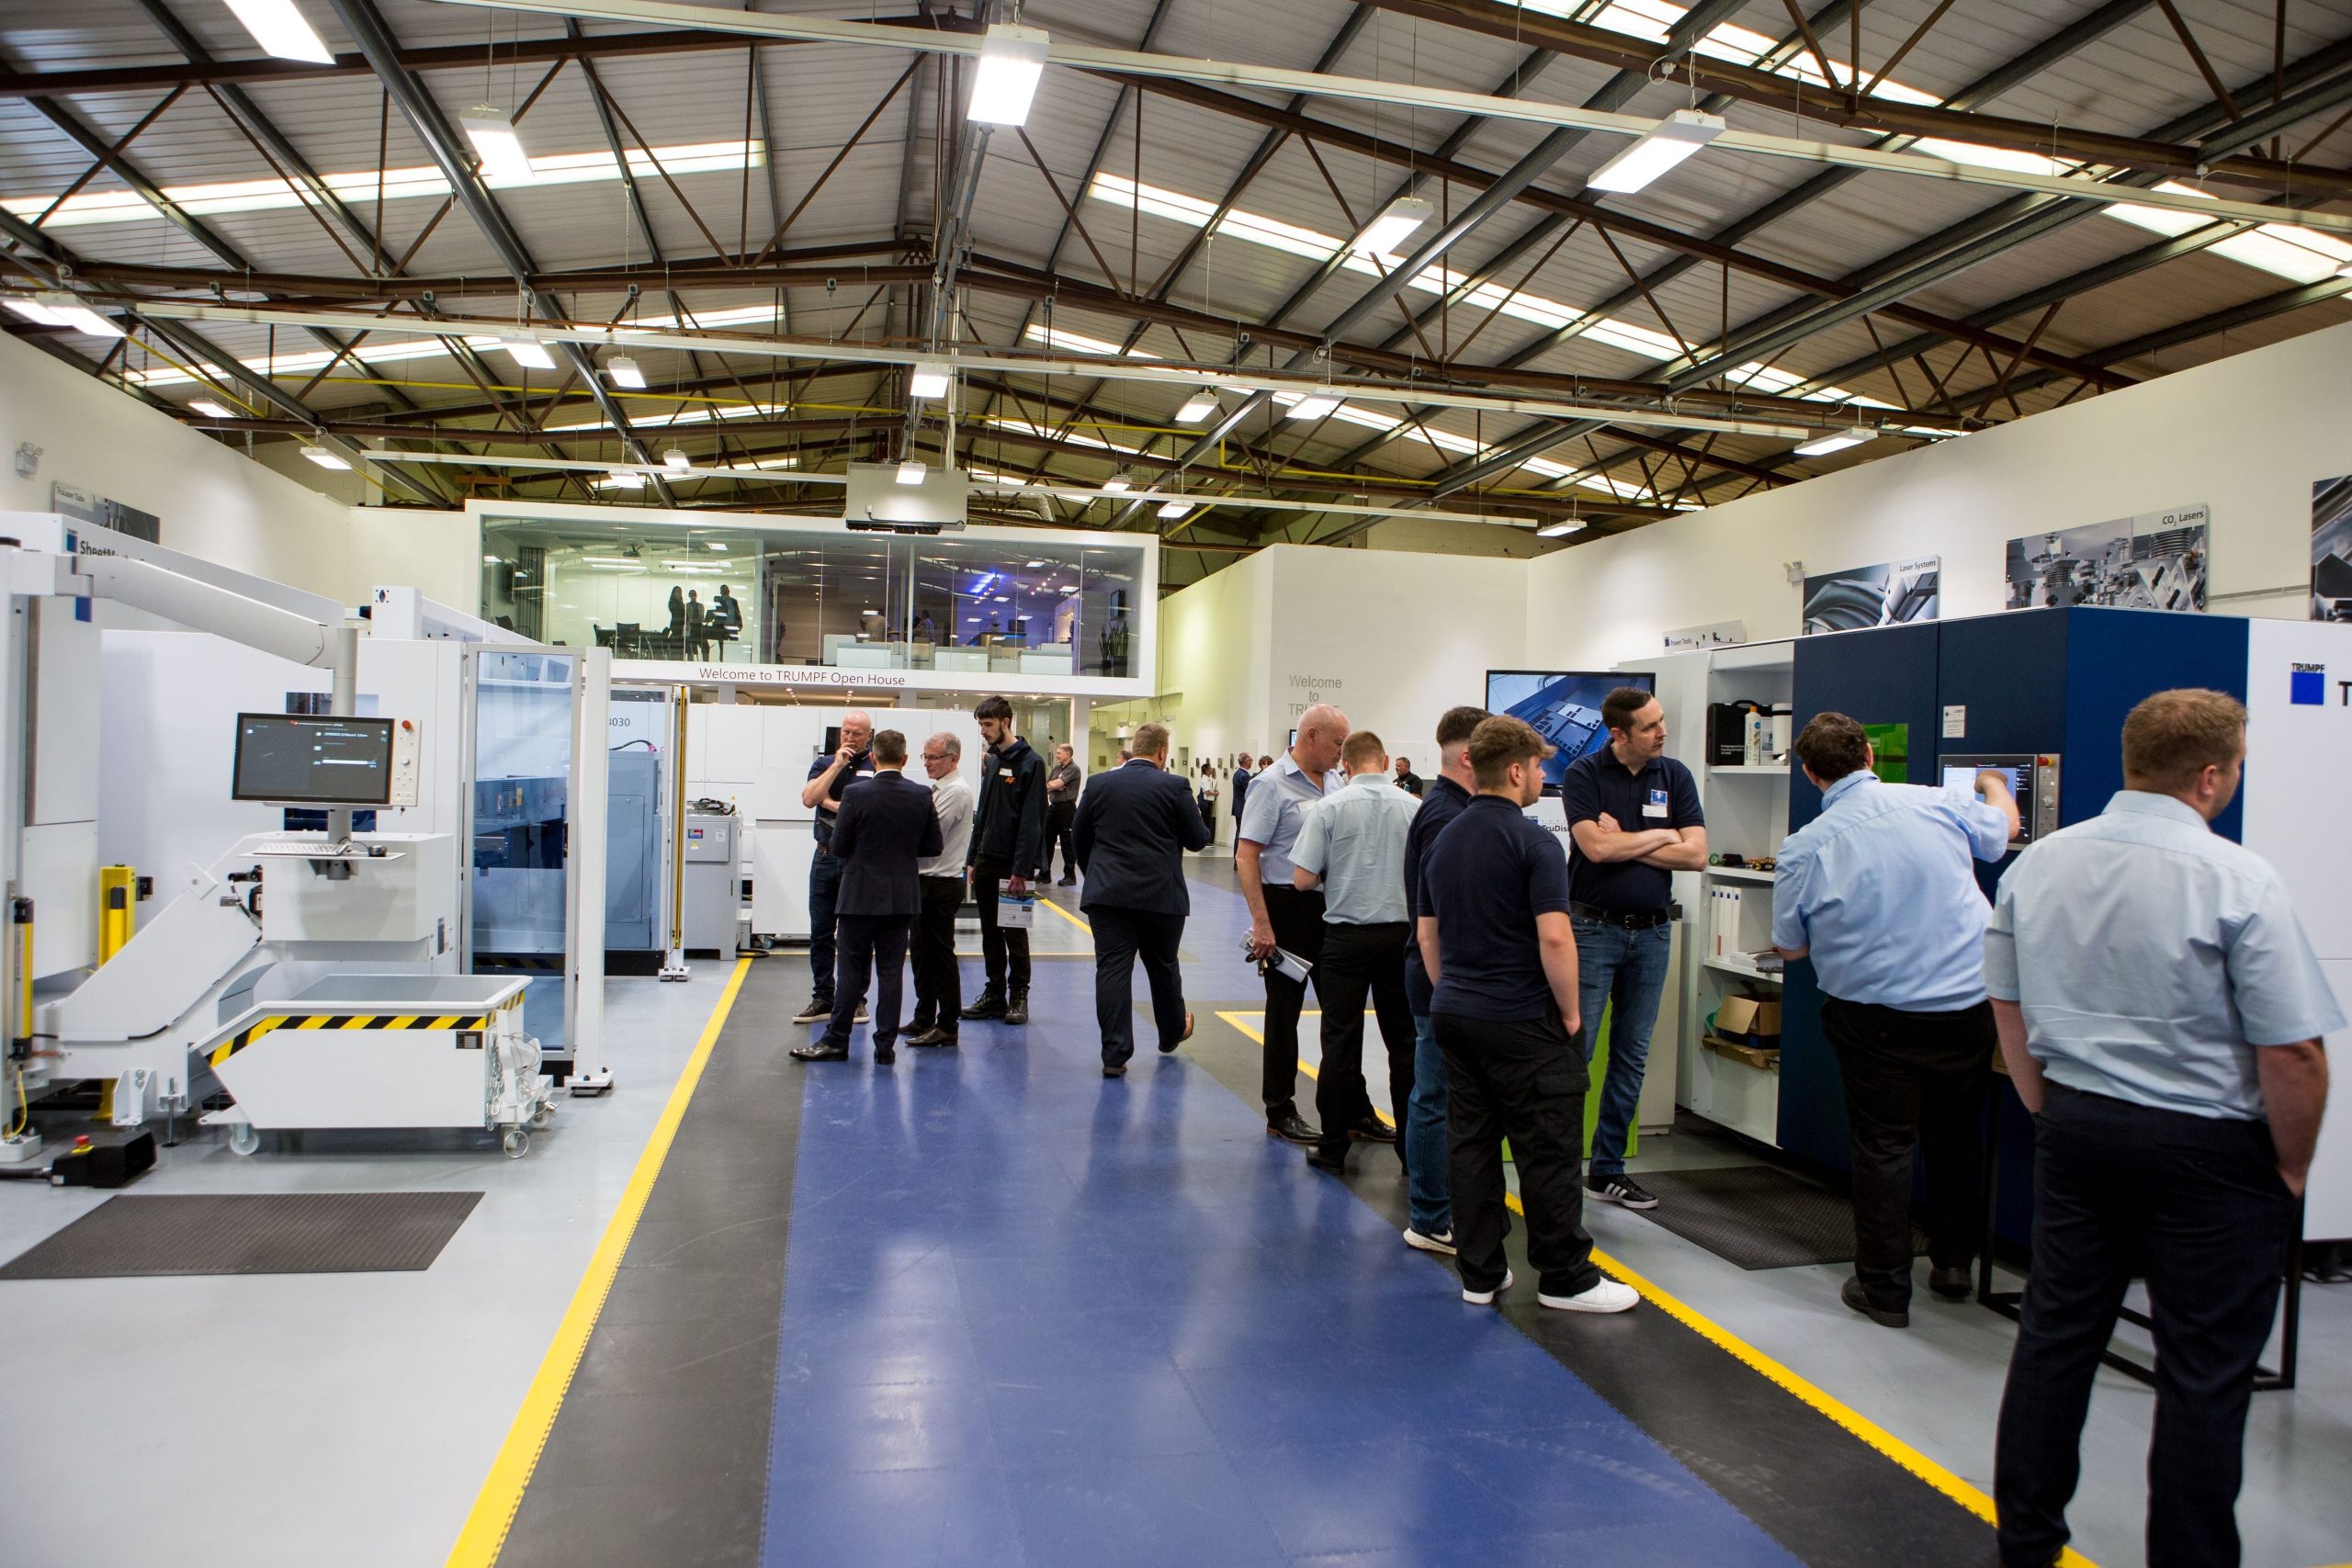 Another successful Open House for TRUMPF